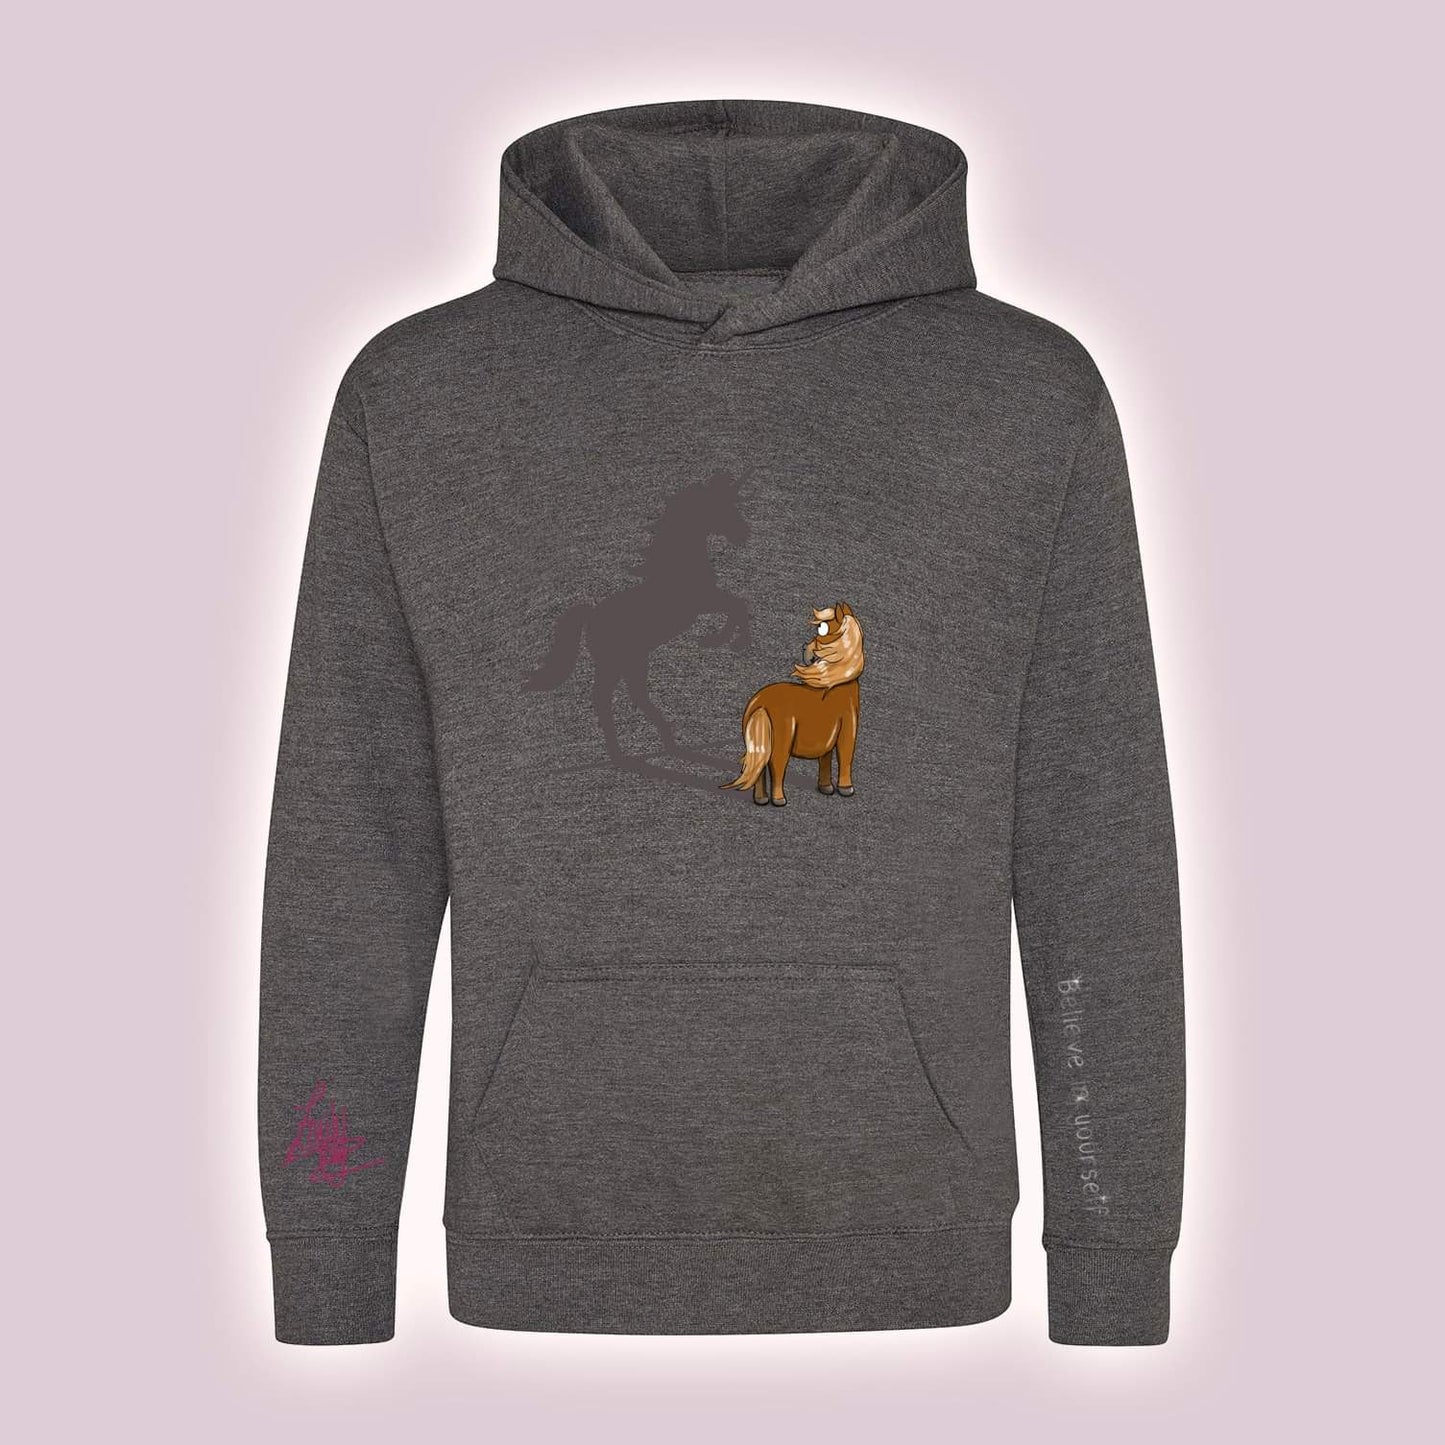 Equiboodle Emily Cole Kids Cub Hoodie - Flaxen Chestnut Believe In Yourself